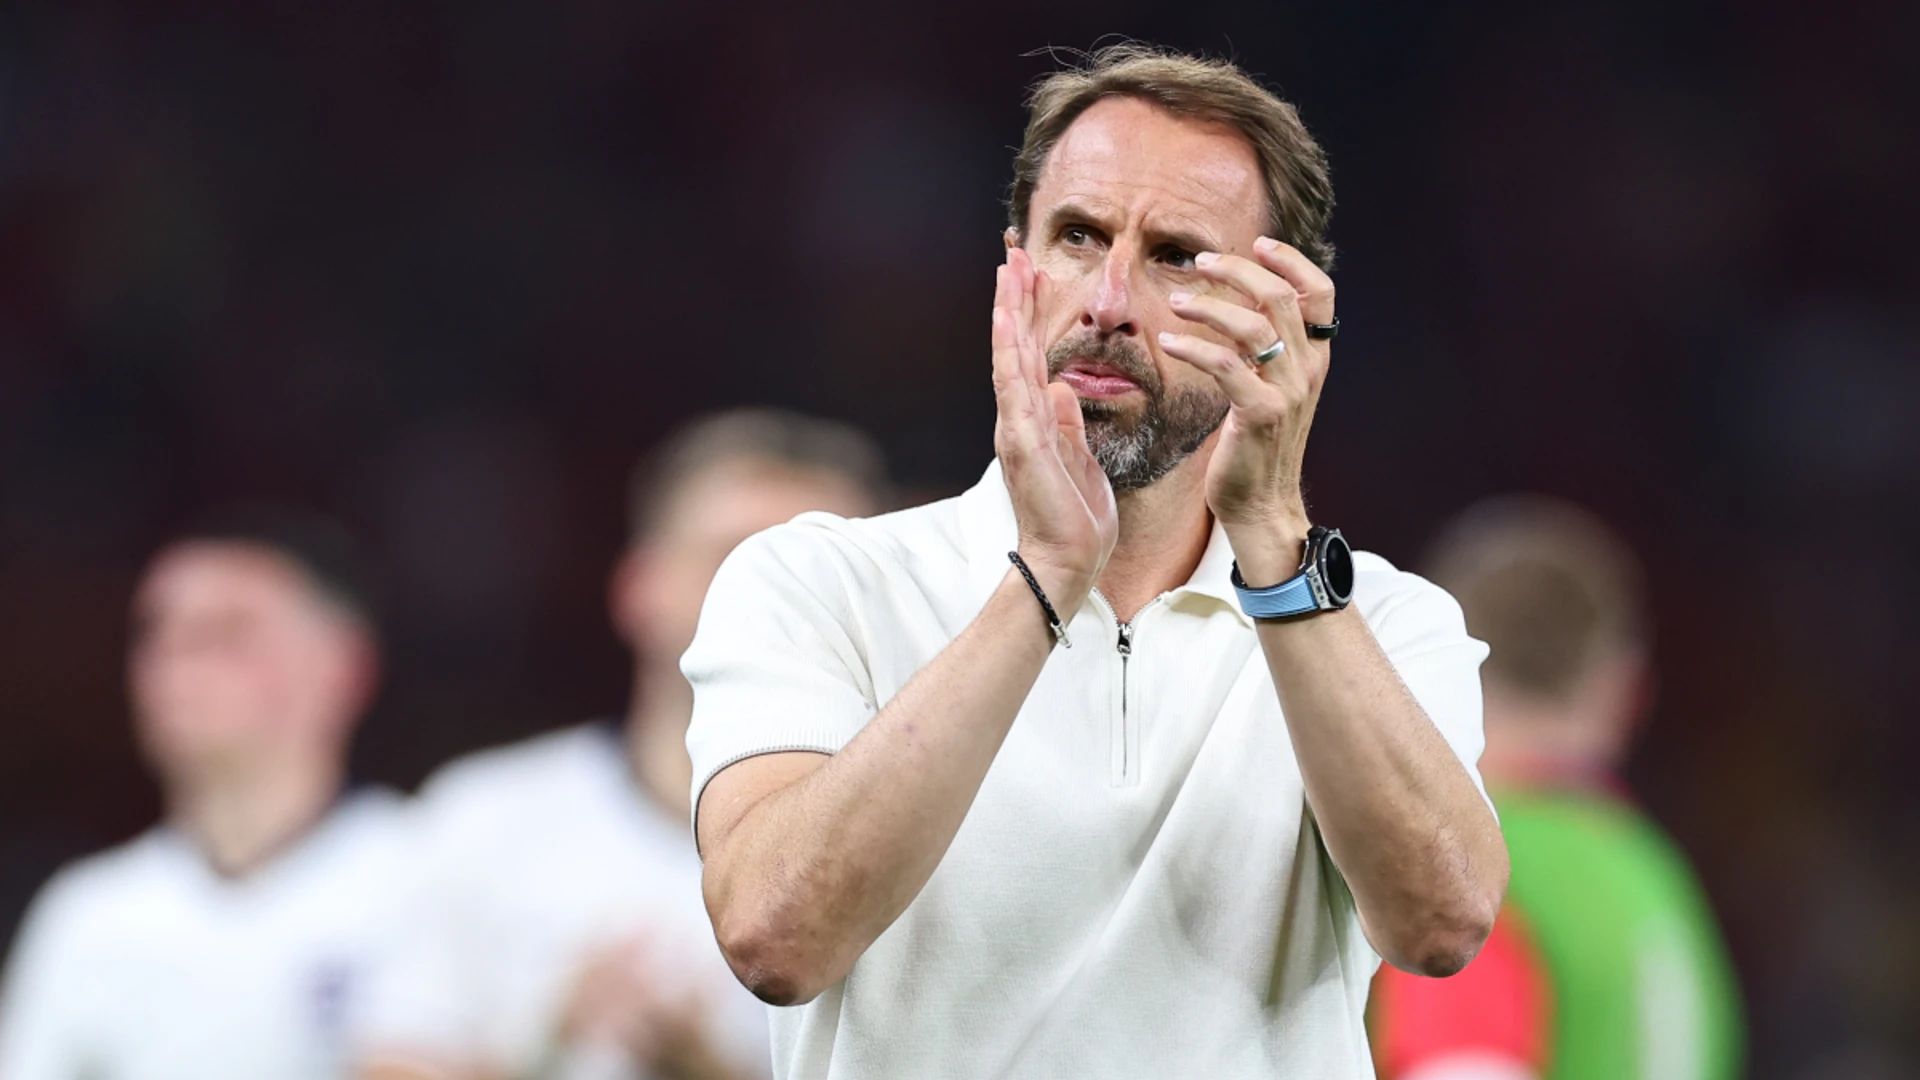 Southgate's exit leaves England with difficult successor search